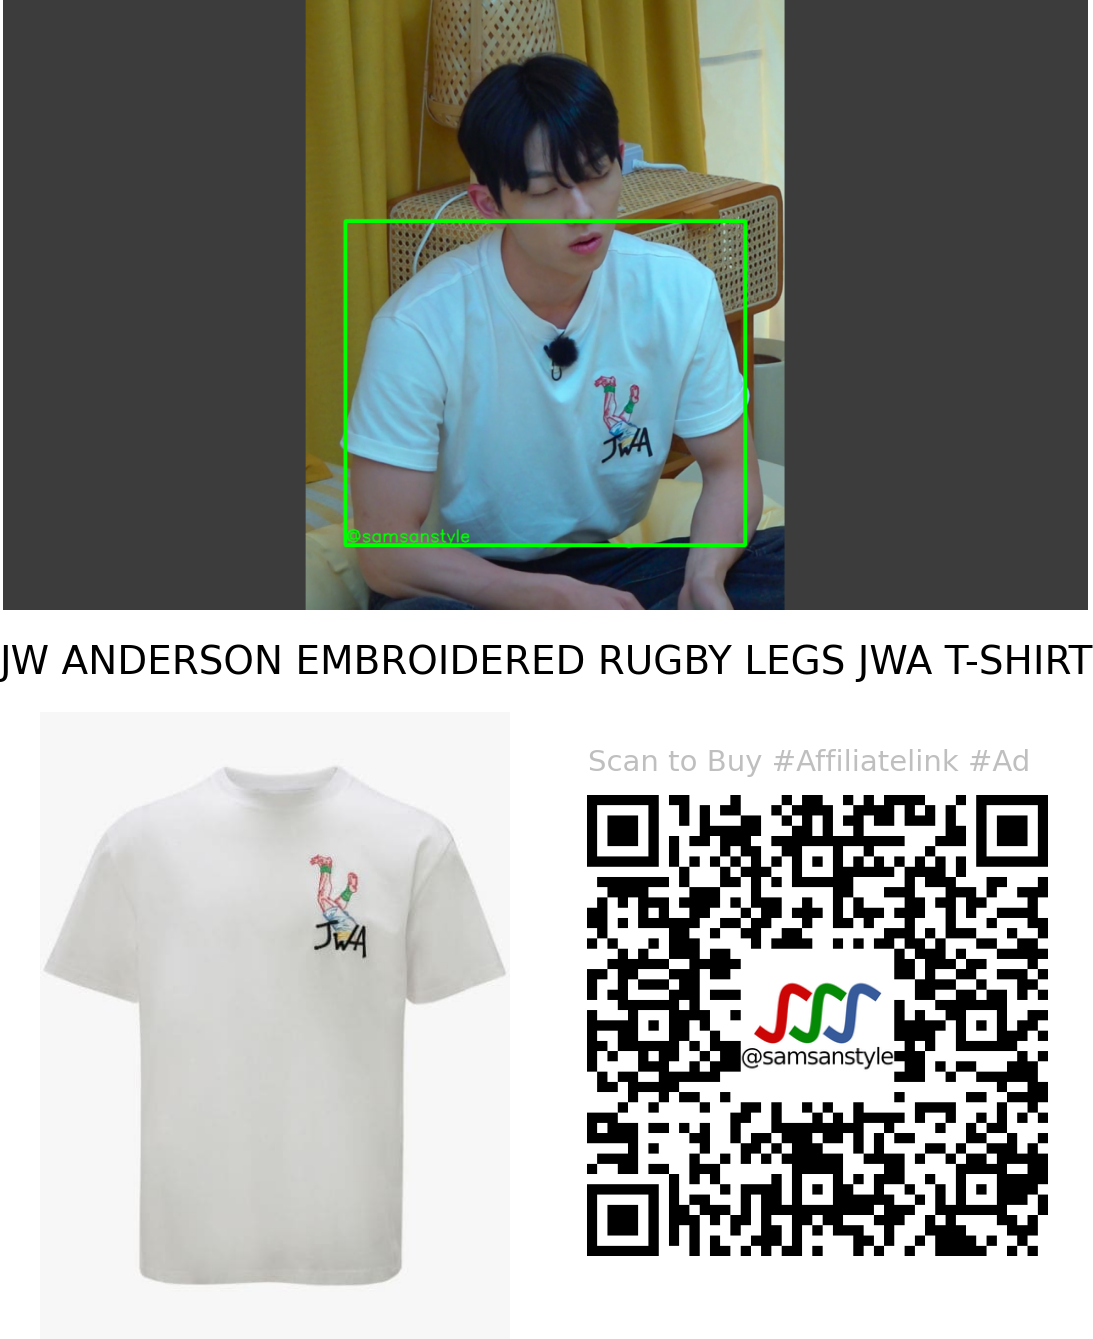 Kim Hanbin | Single’s Inferno S02E04 | JW ANDERSON EMBROIDERED RUGBY LEGS JWA T-SHIRT